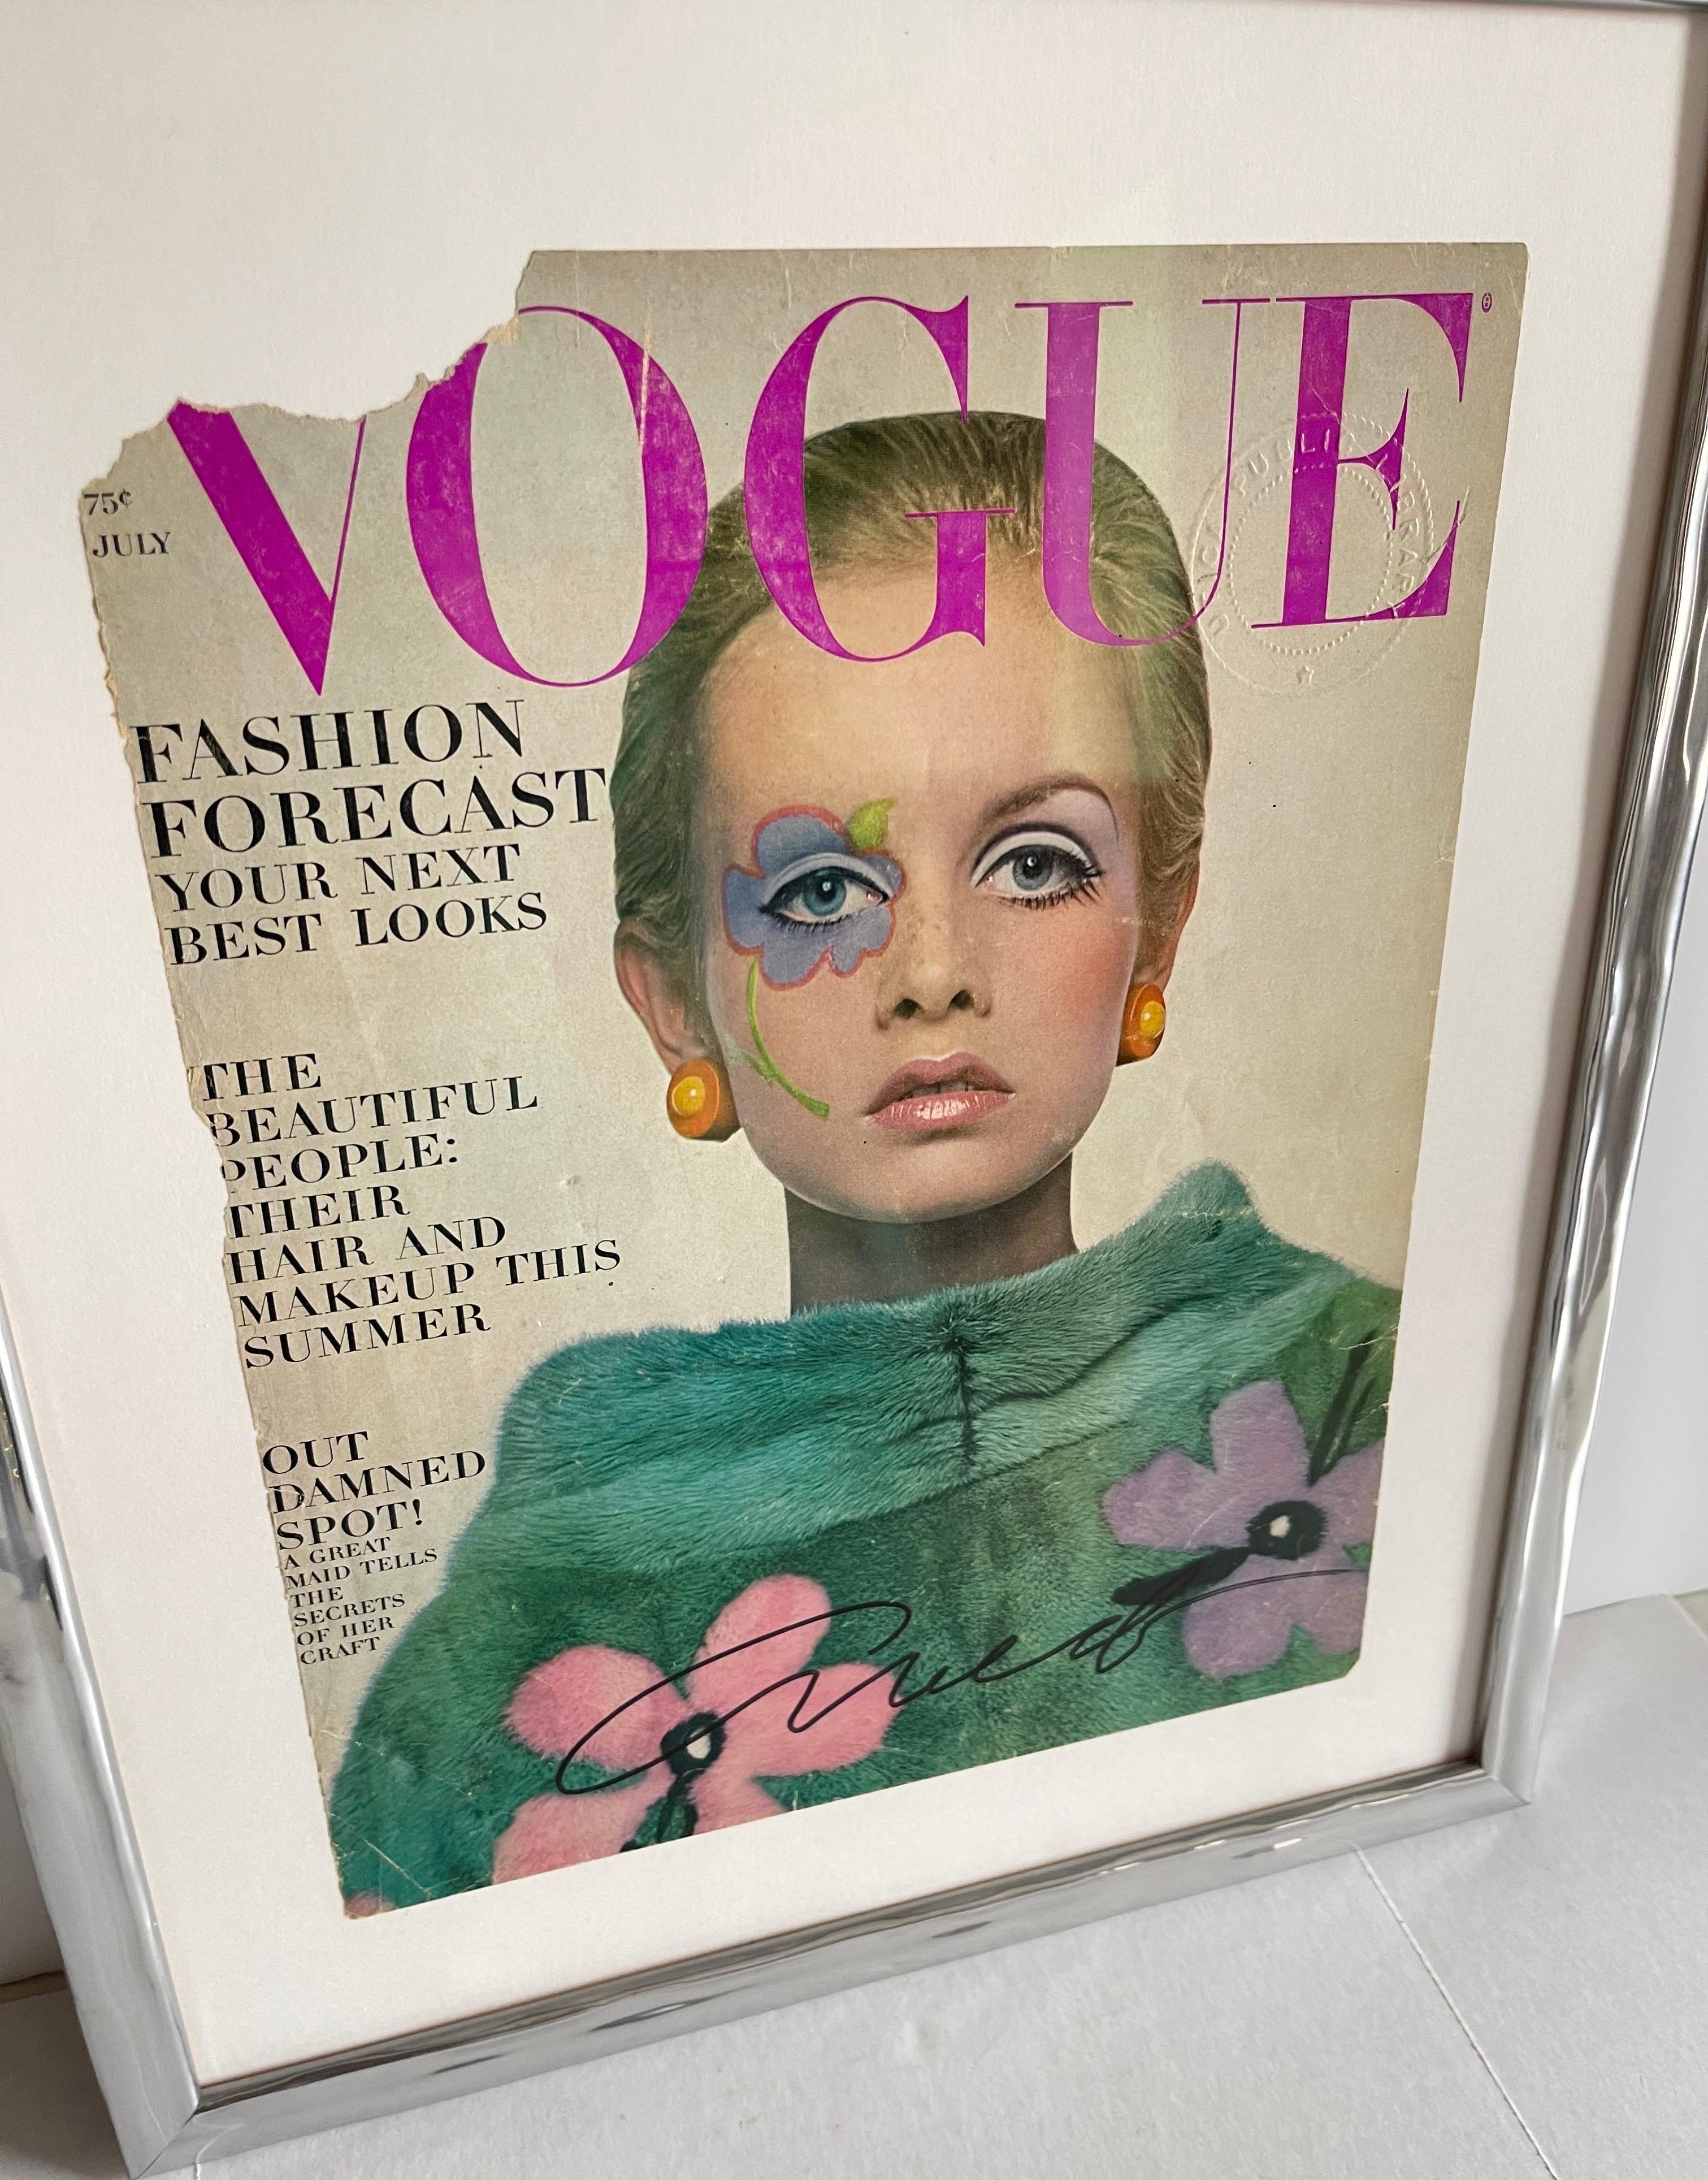 Hollywood Regency Vogue July 1967 Twiggy Cover Signed by Richard Avedon